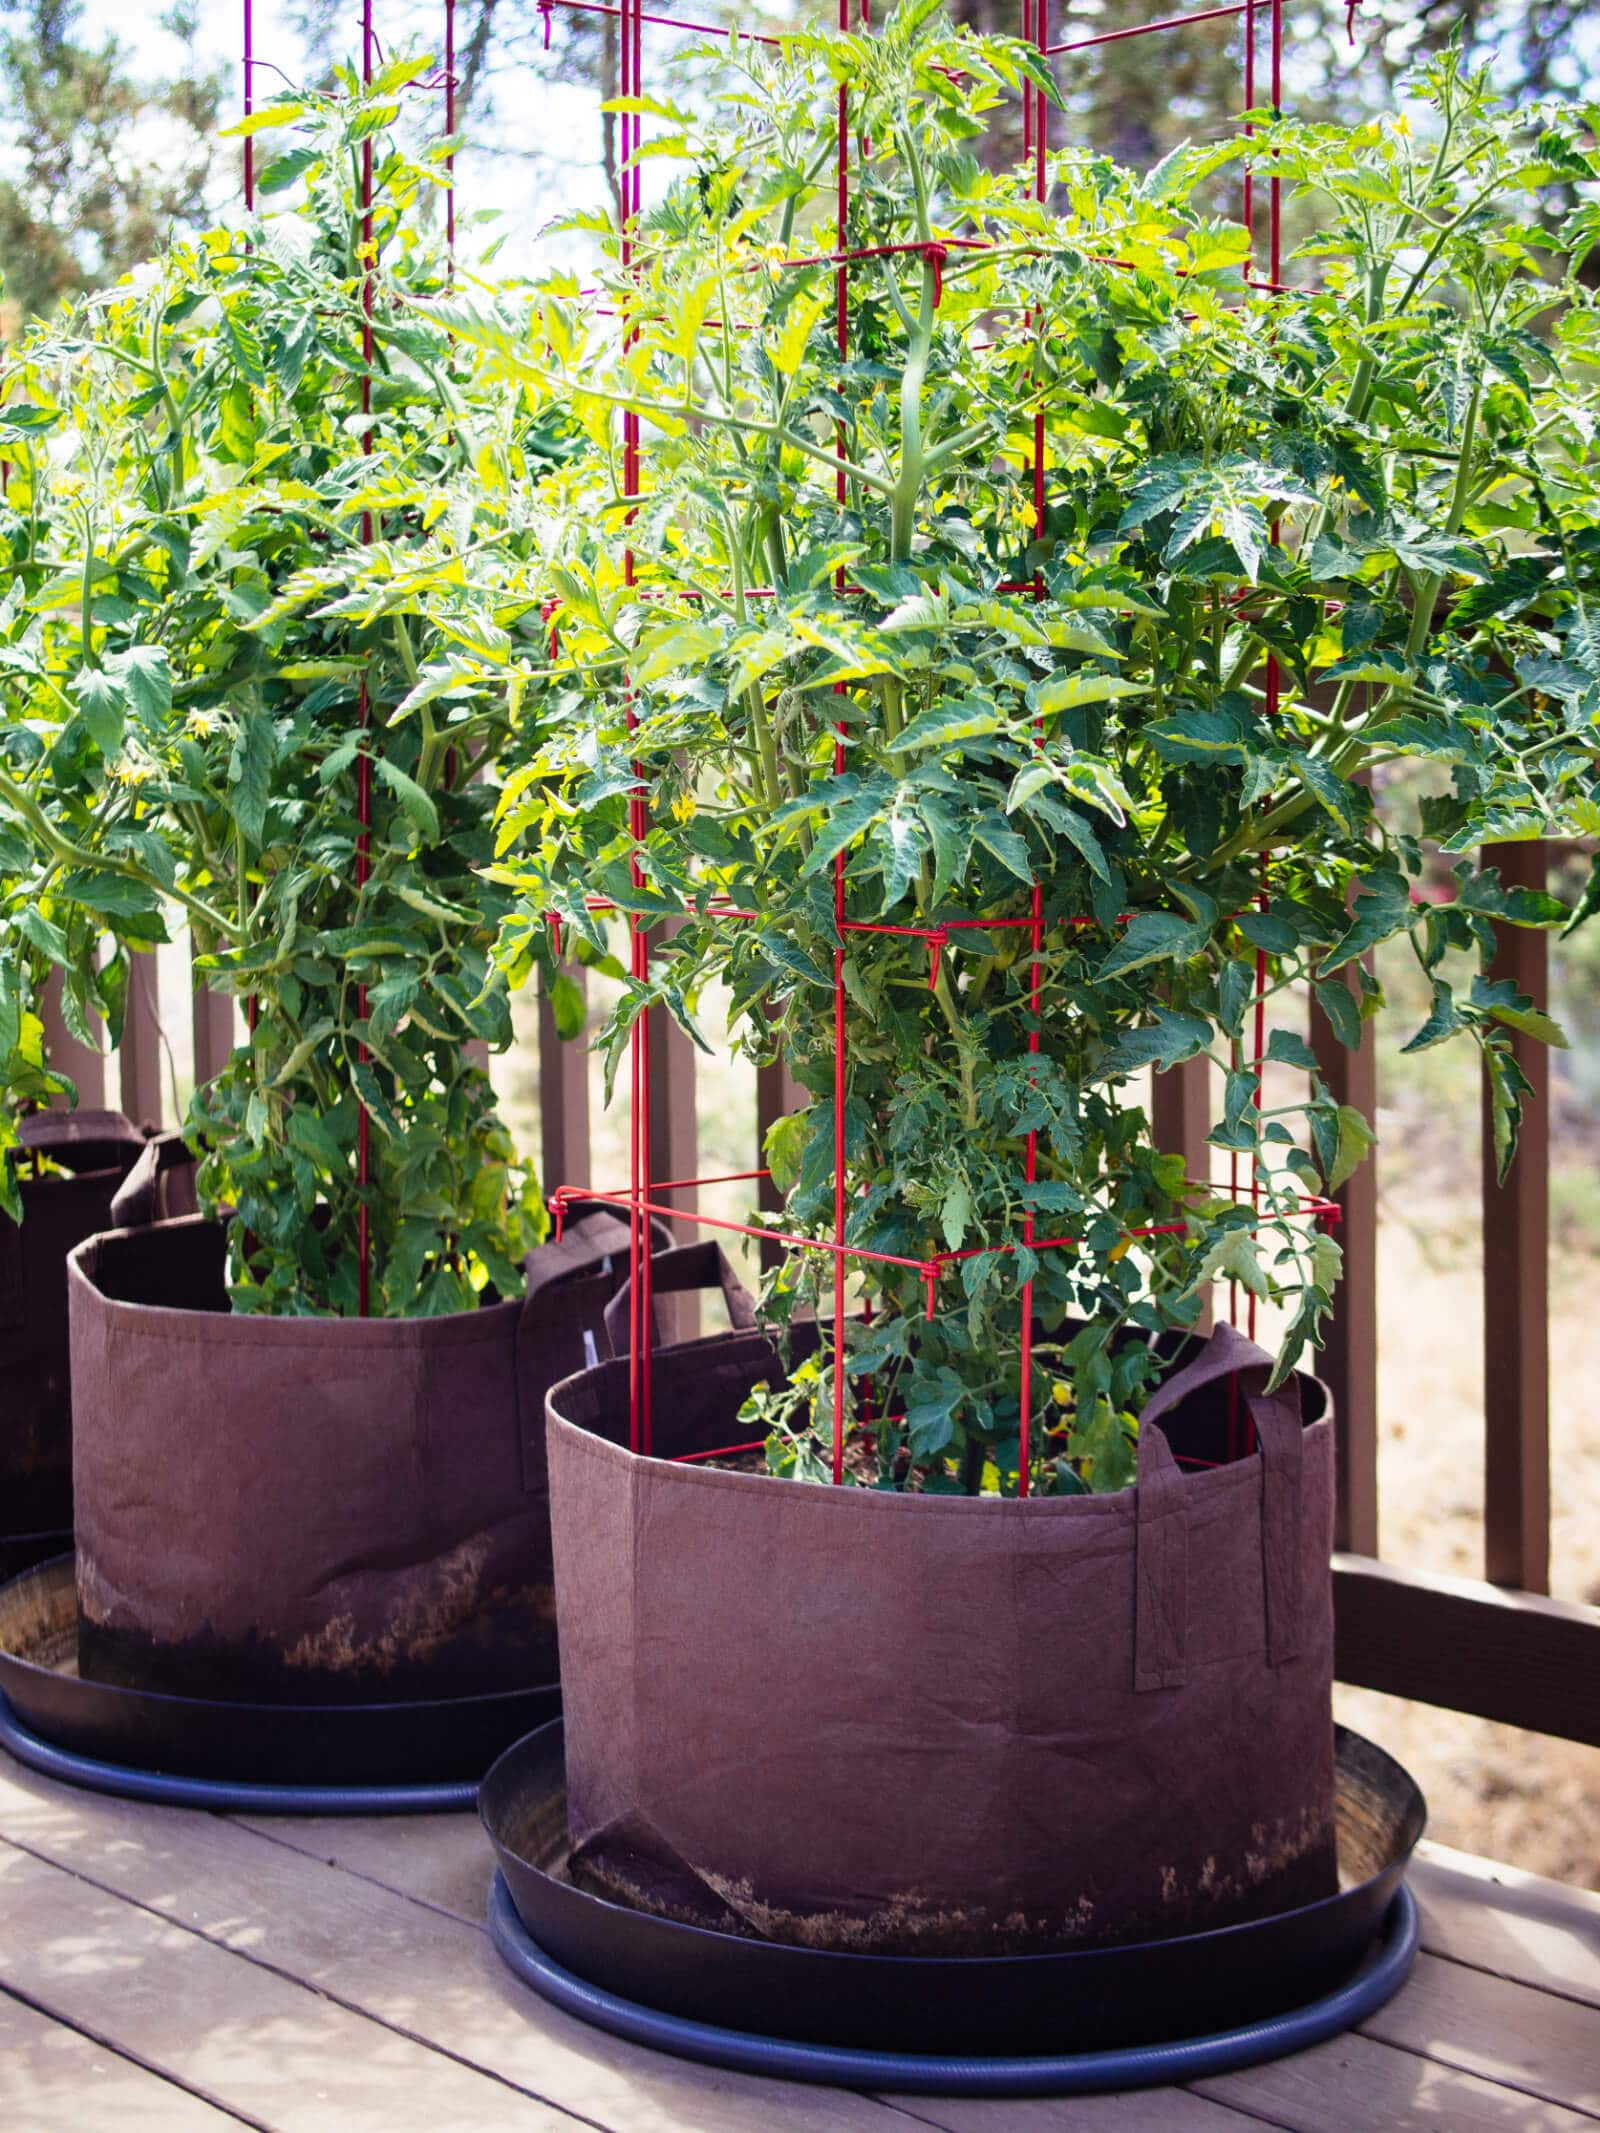 Allow ample space for growing your tomato plants